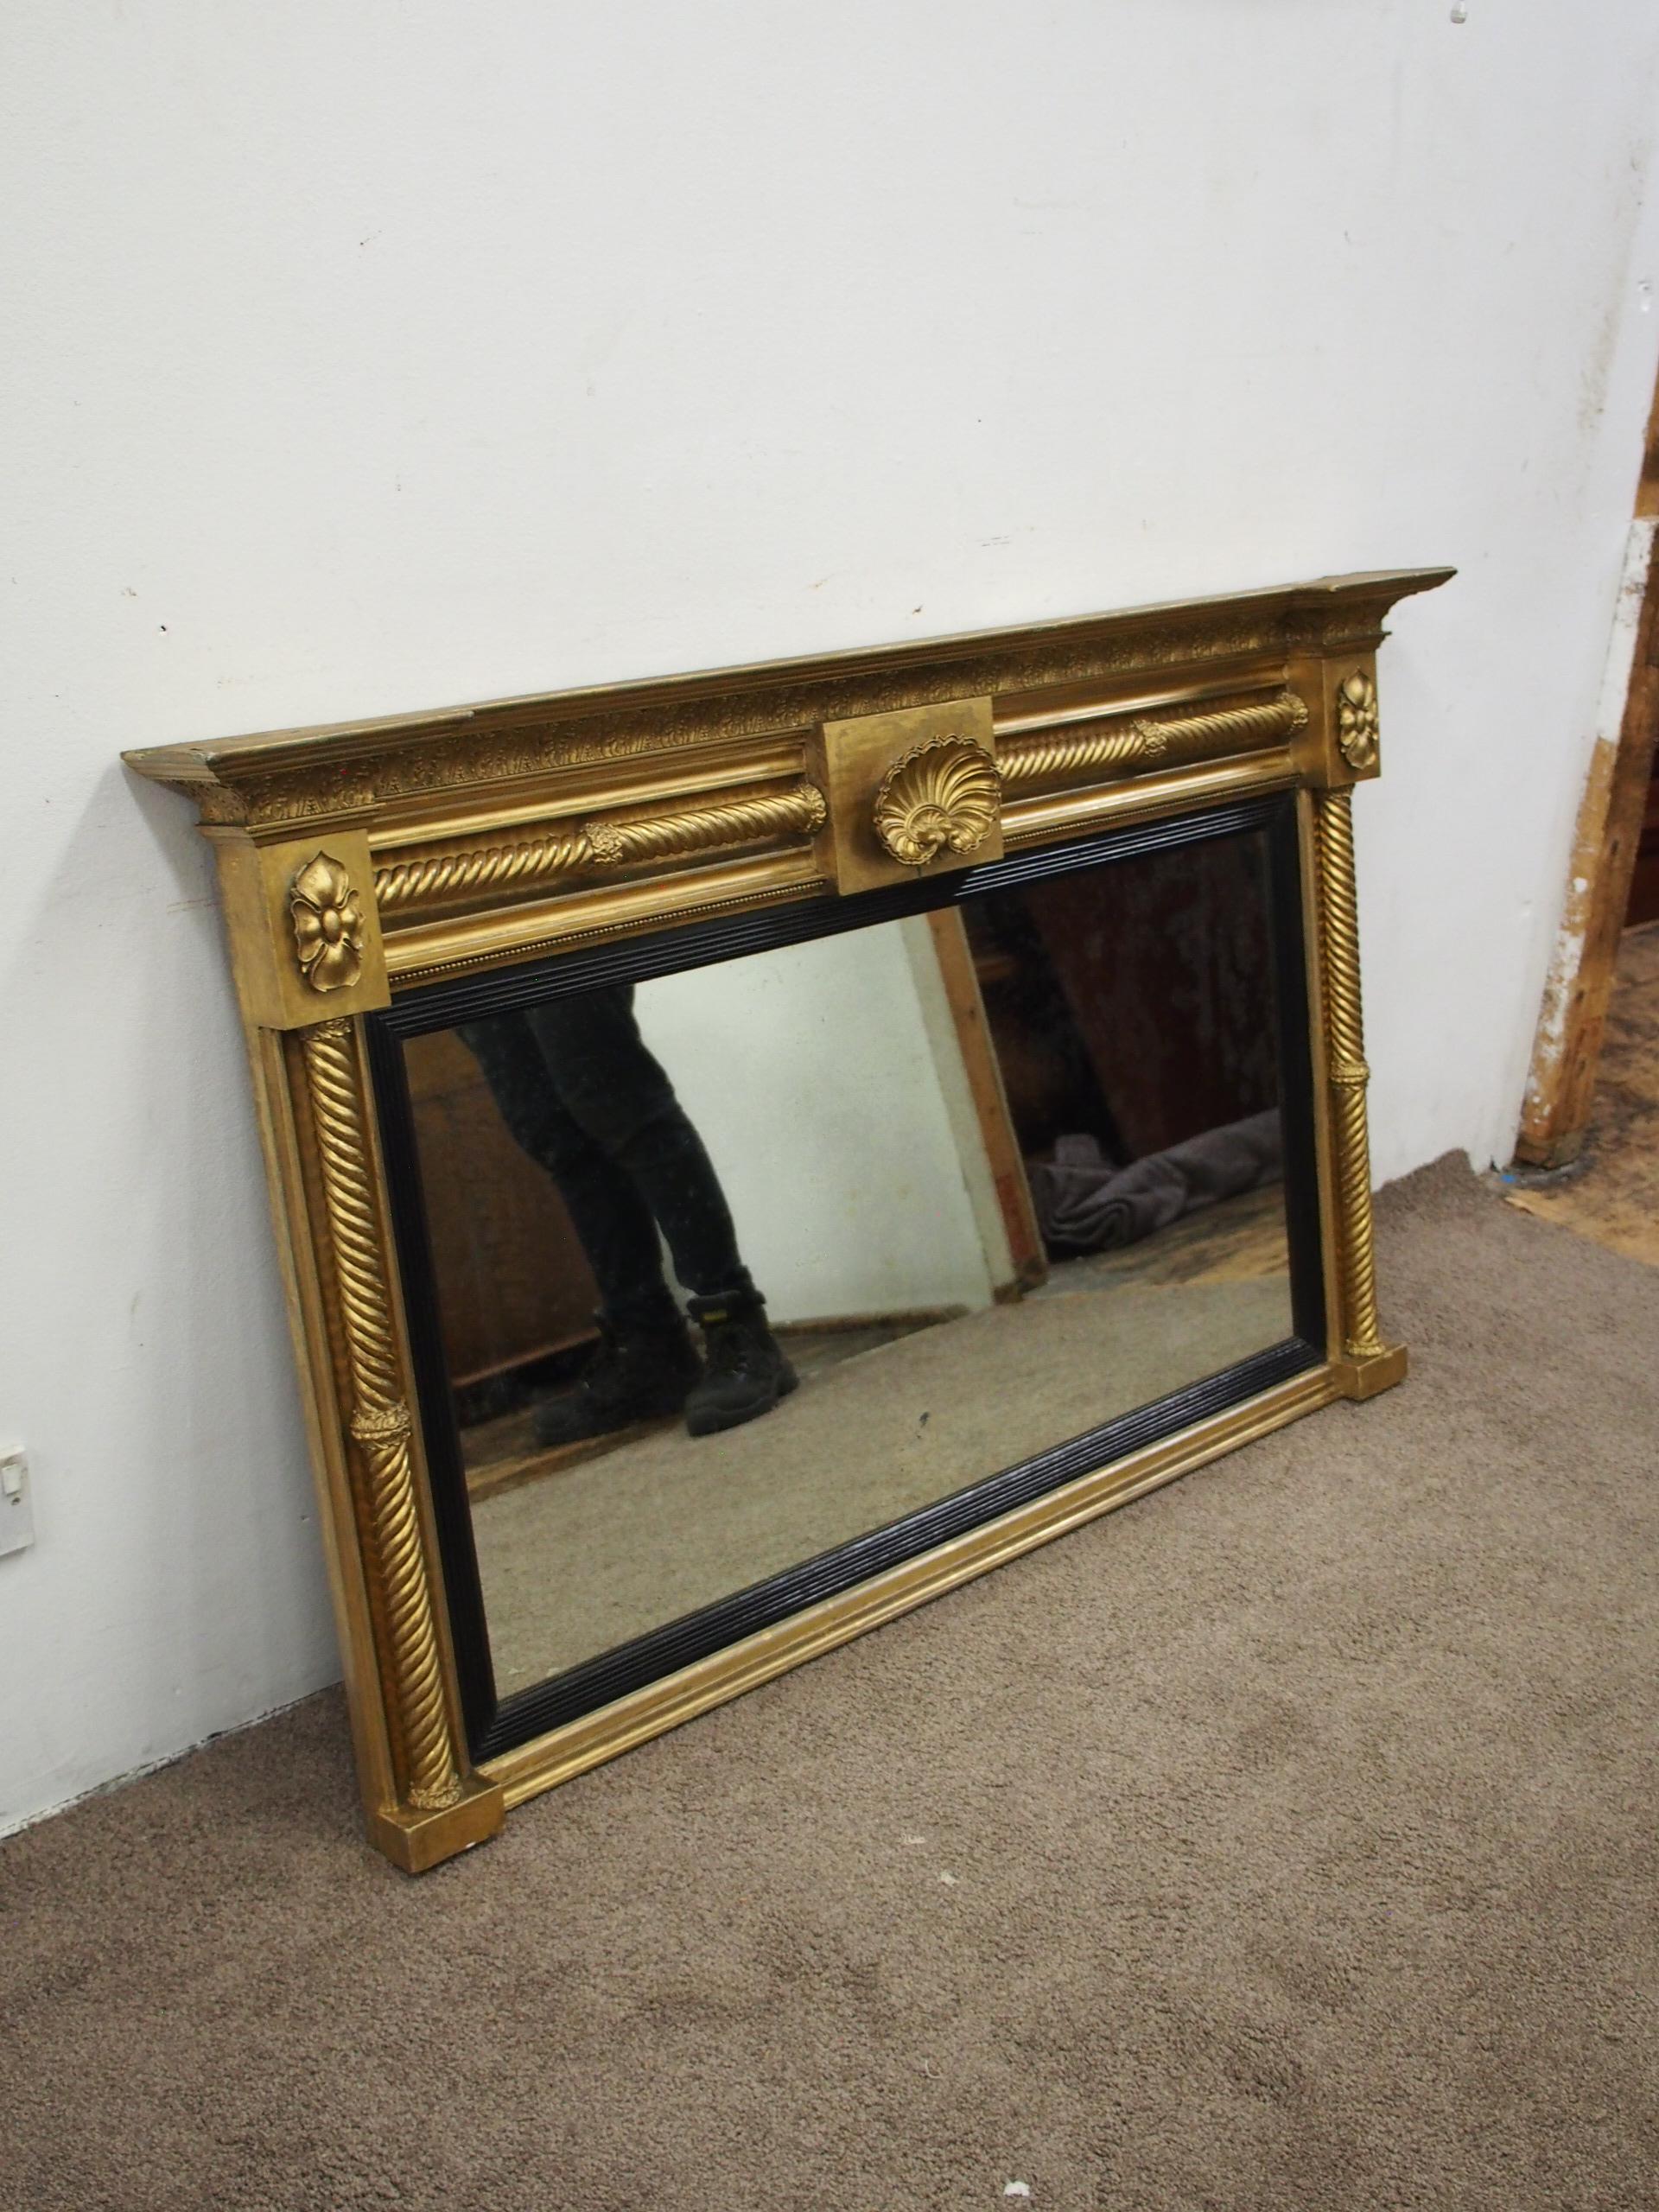 George IV gilded and ebonized overmantel mirror, circa 1820. It has a breakfront section, with a foliate decorated cornice and a central carved and gilded shell. To either side are barley sugar twists, finishing on foliate bezels and the mirror